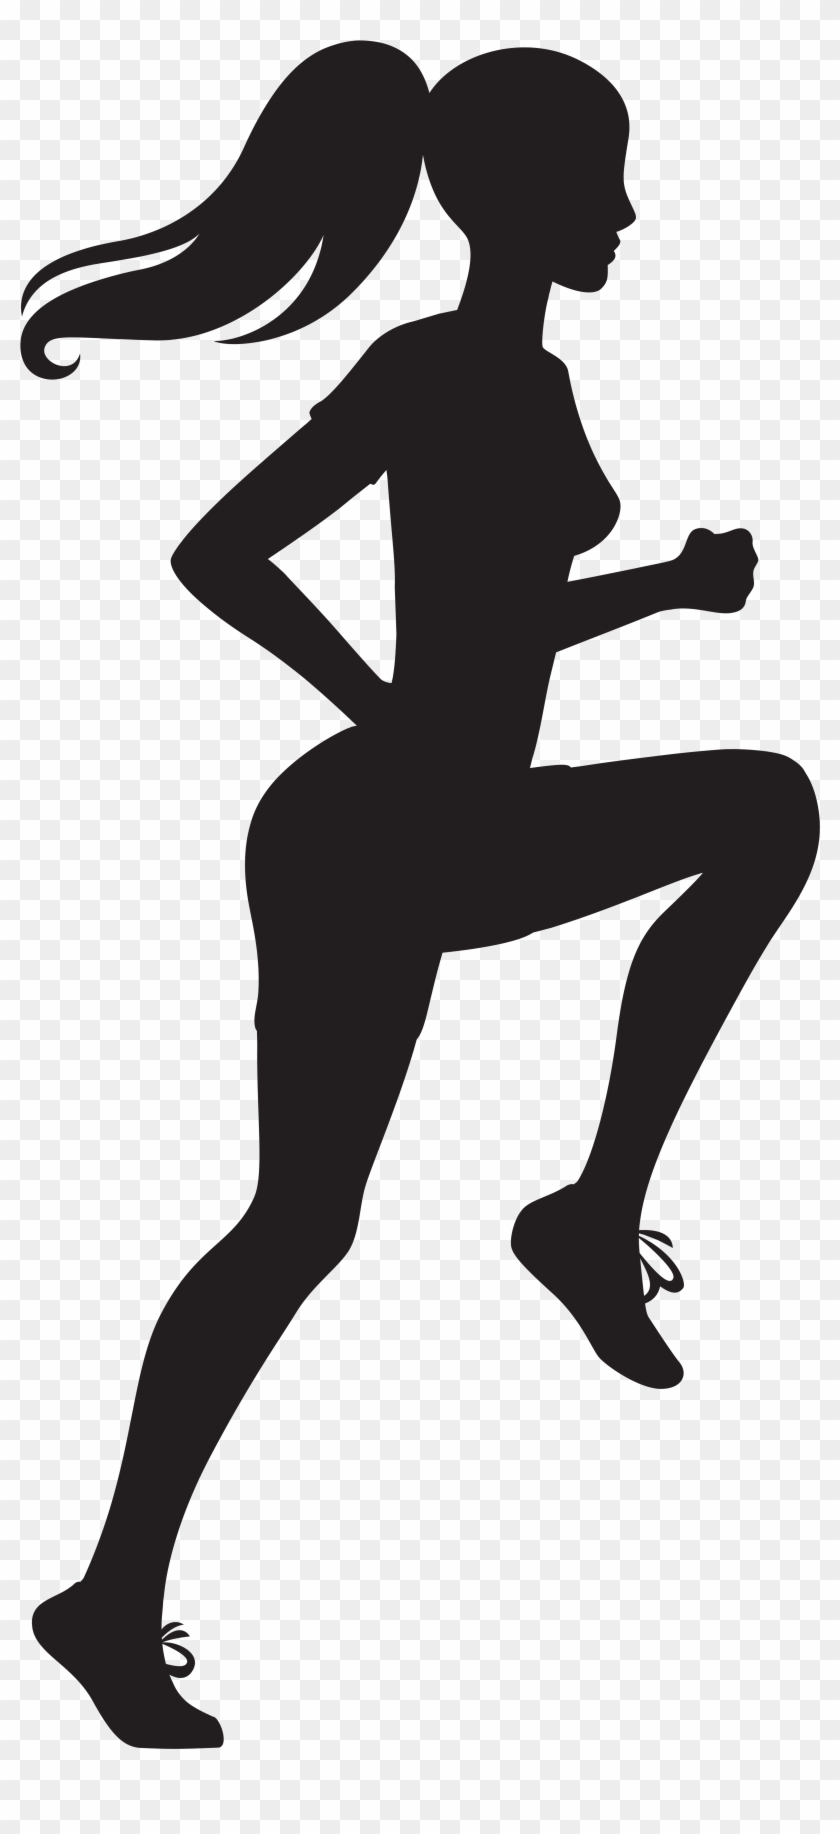 Running Woman Silhouette Transparent Image - Athletics Sports Clip Art - Png Download #1559193